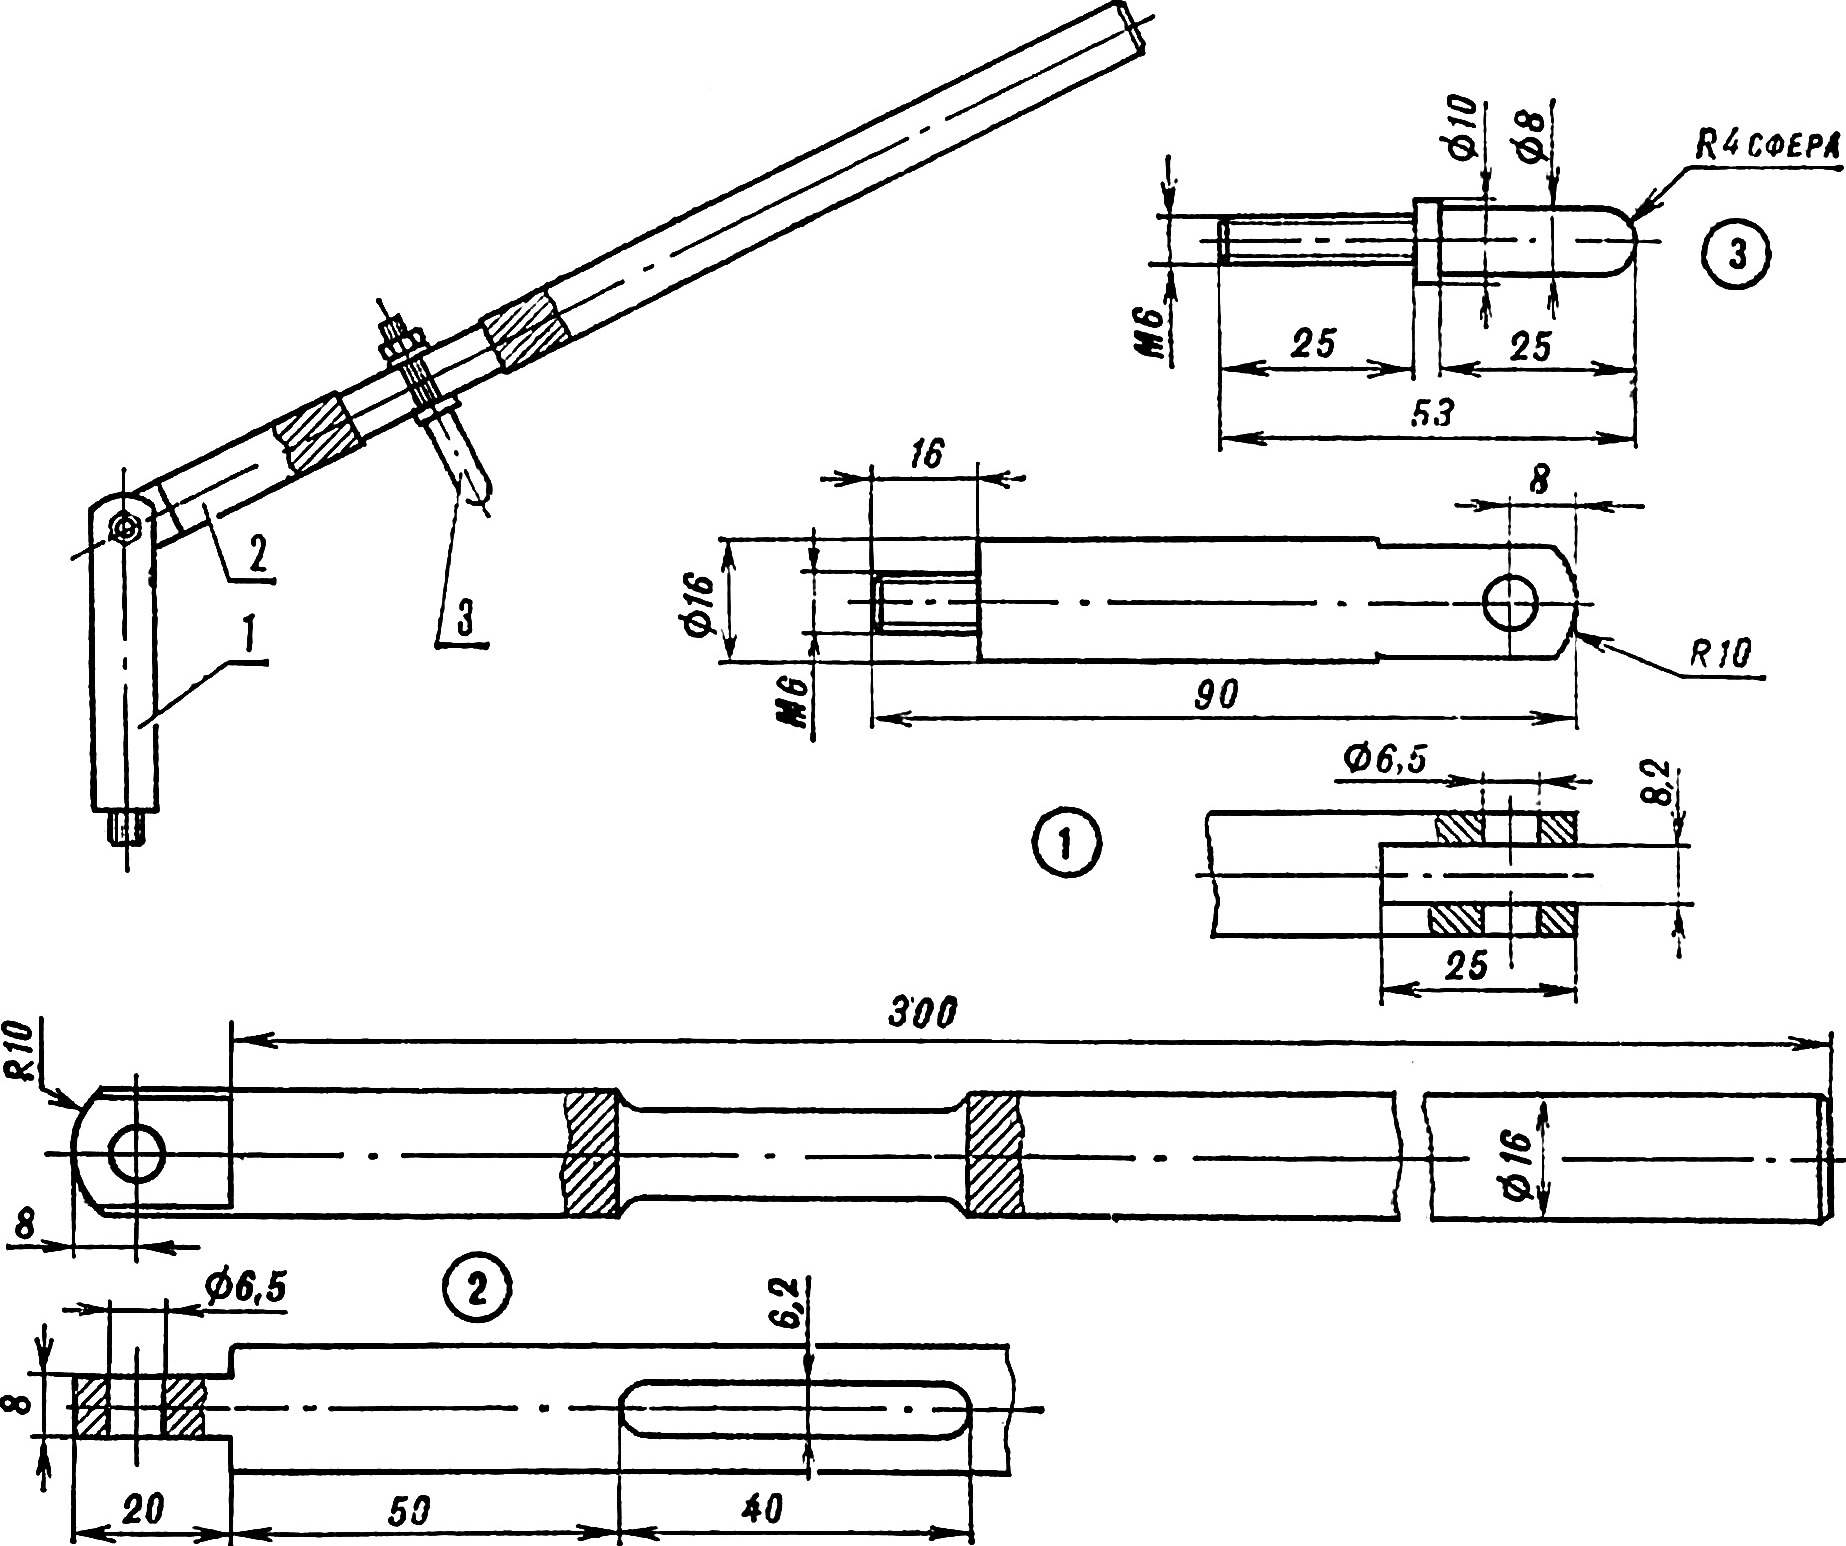 Fig. 2. The clamping lever.